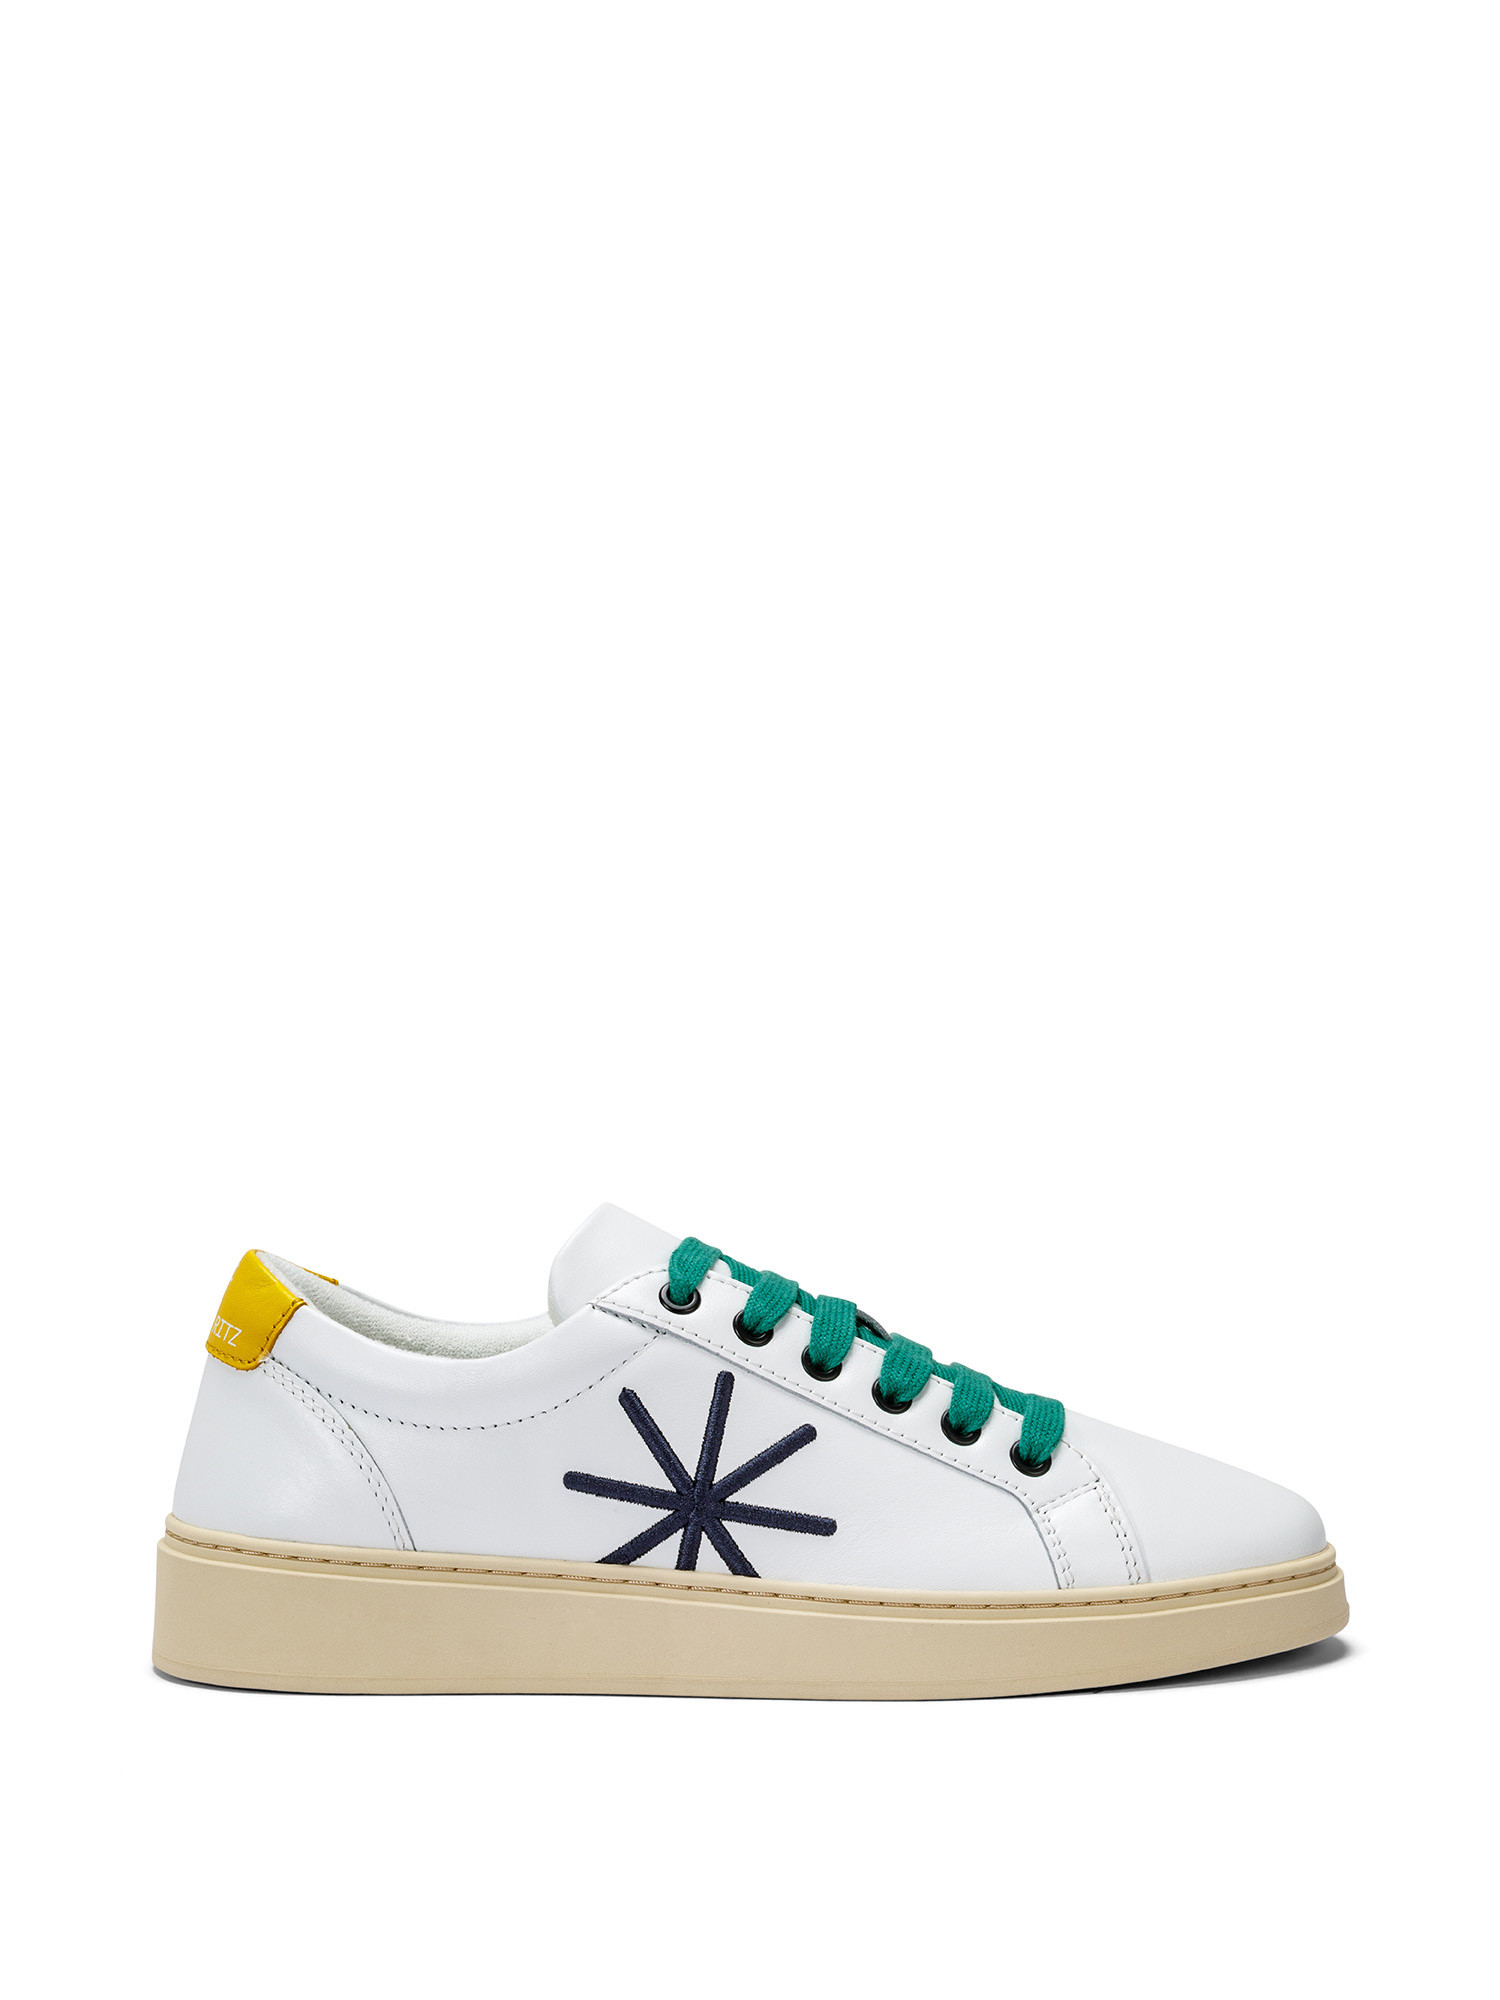 Manuel Ritz - Sneakers in pelle con logo, Bianco, large image number 0